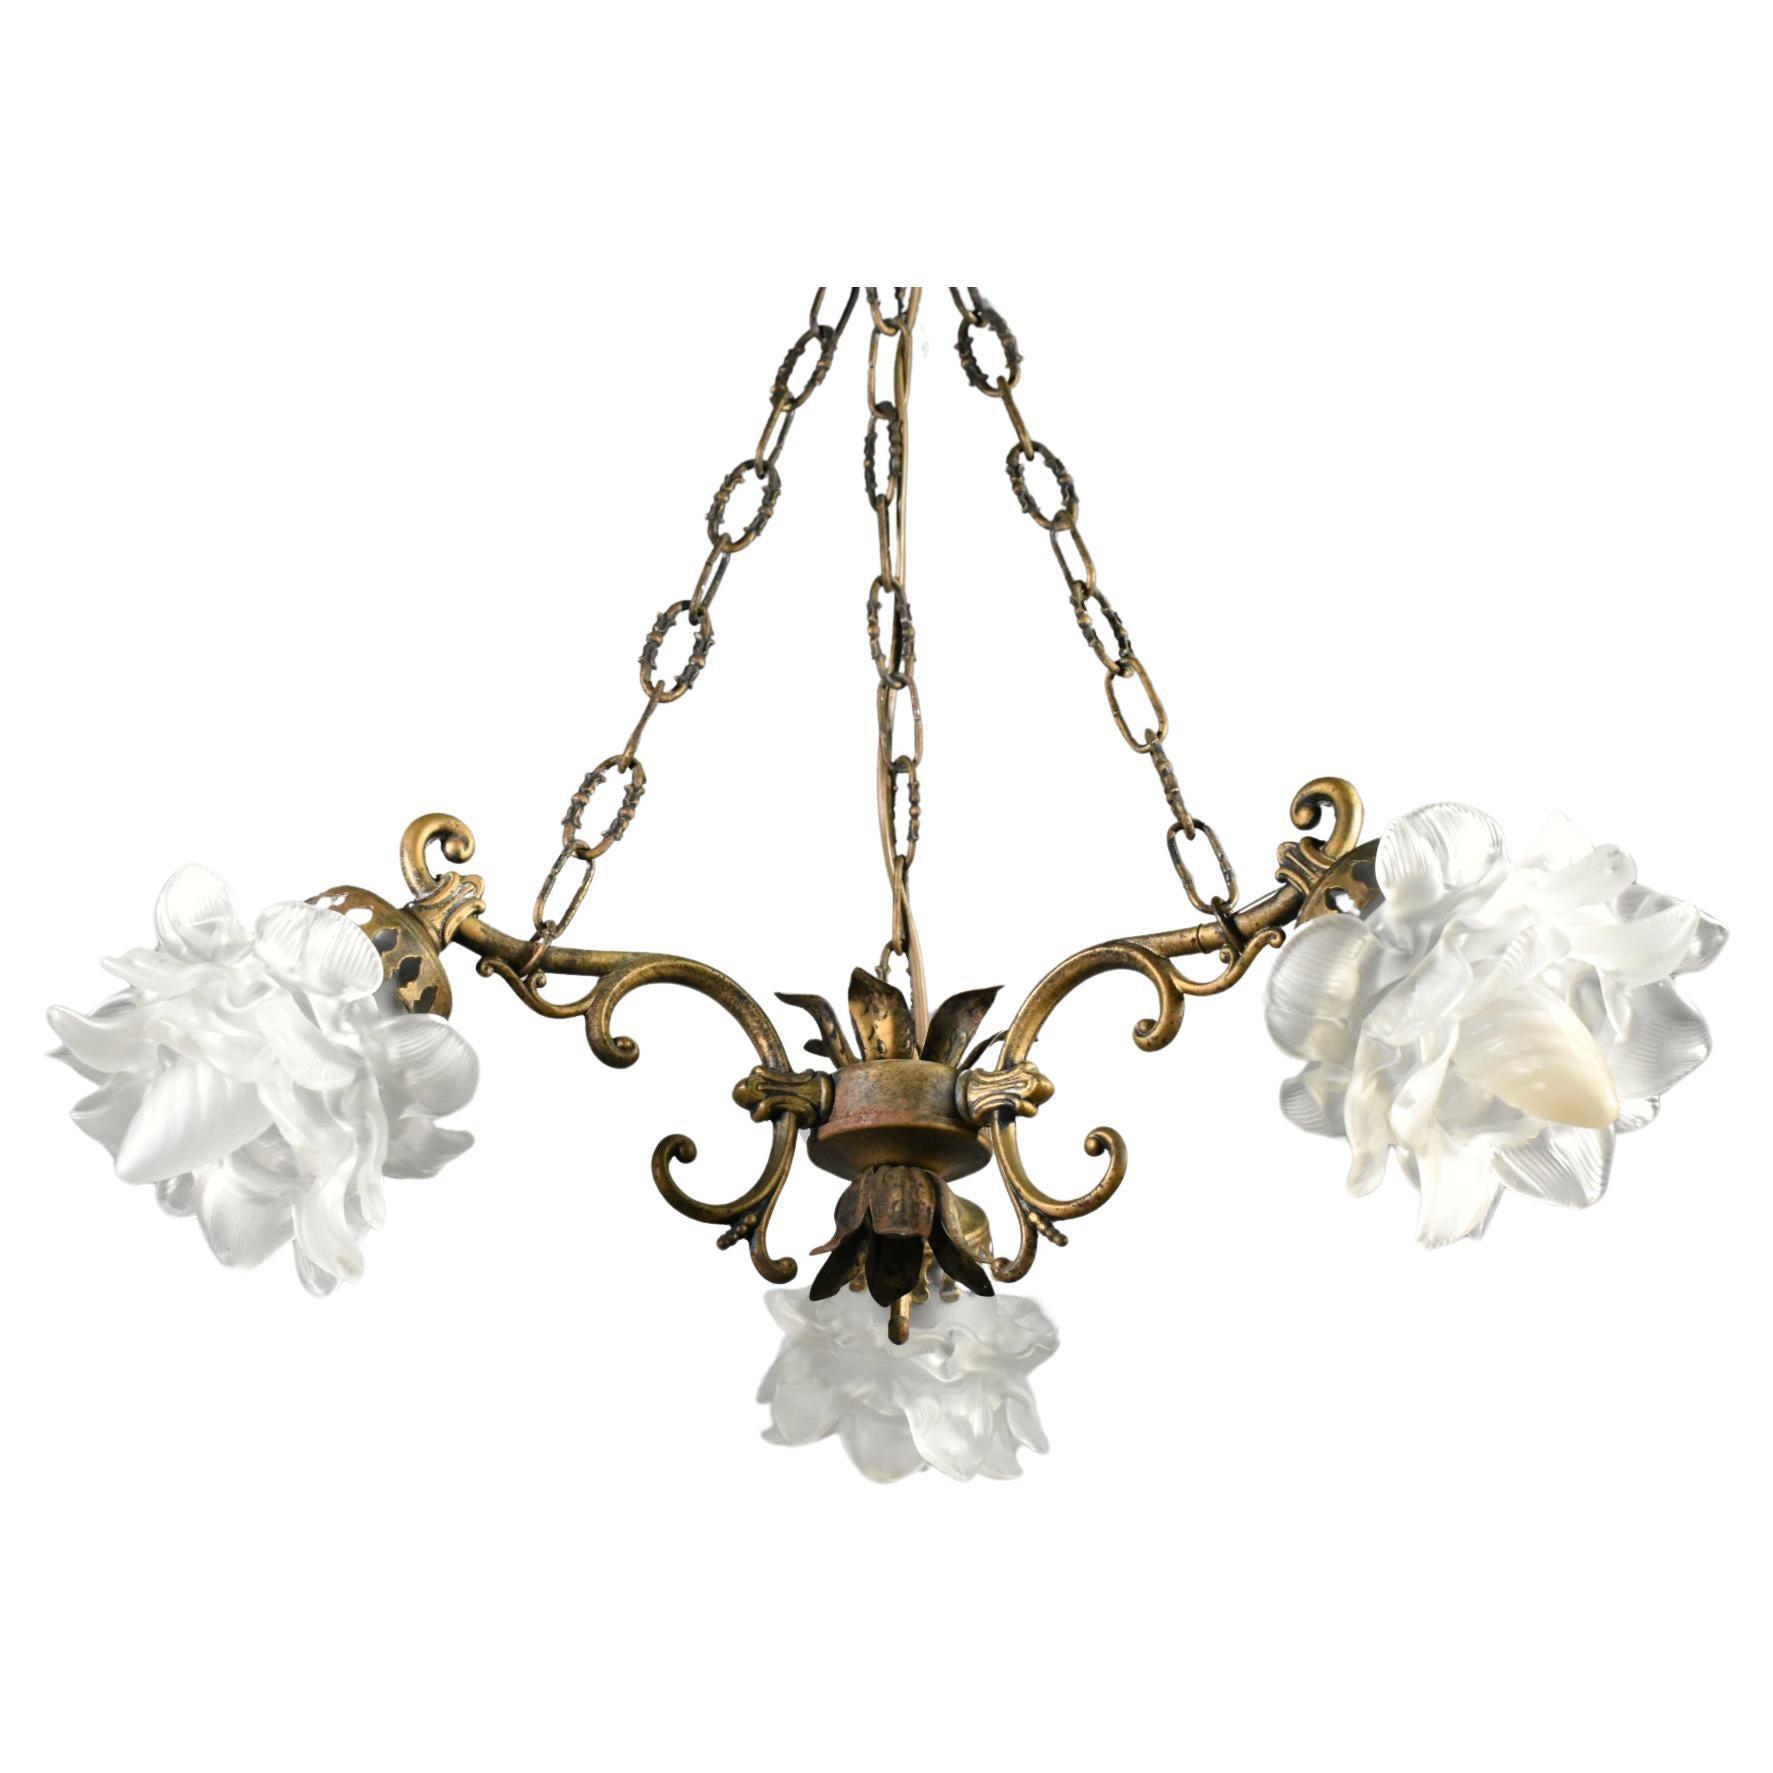 French Mid Century Ceiling Light with Three Floral Shades